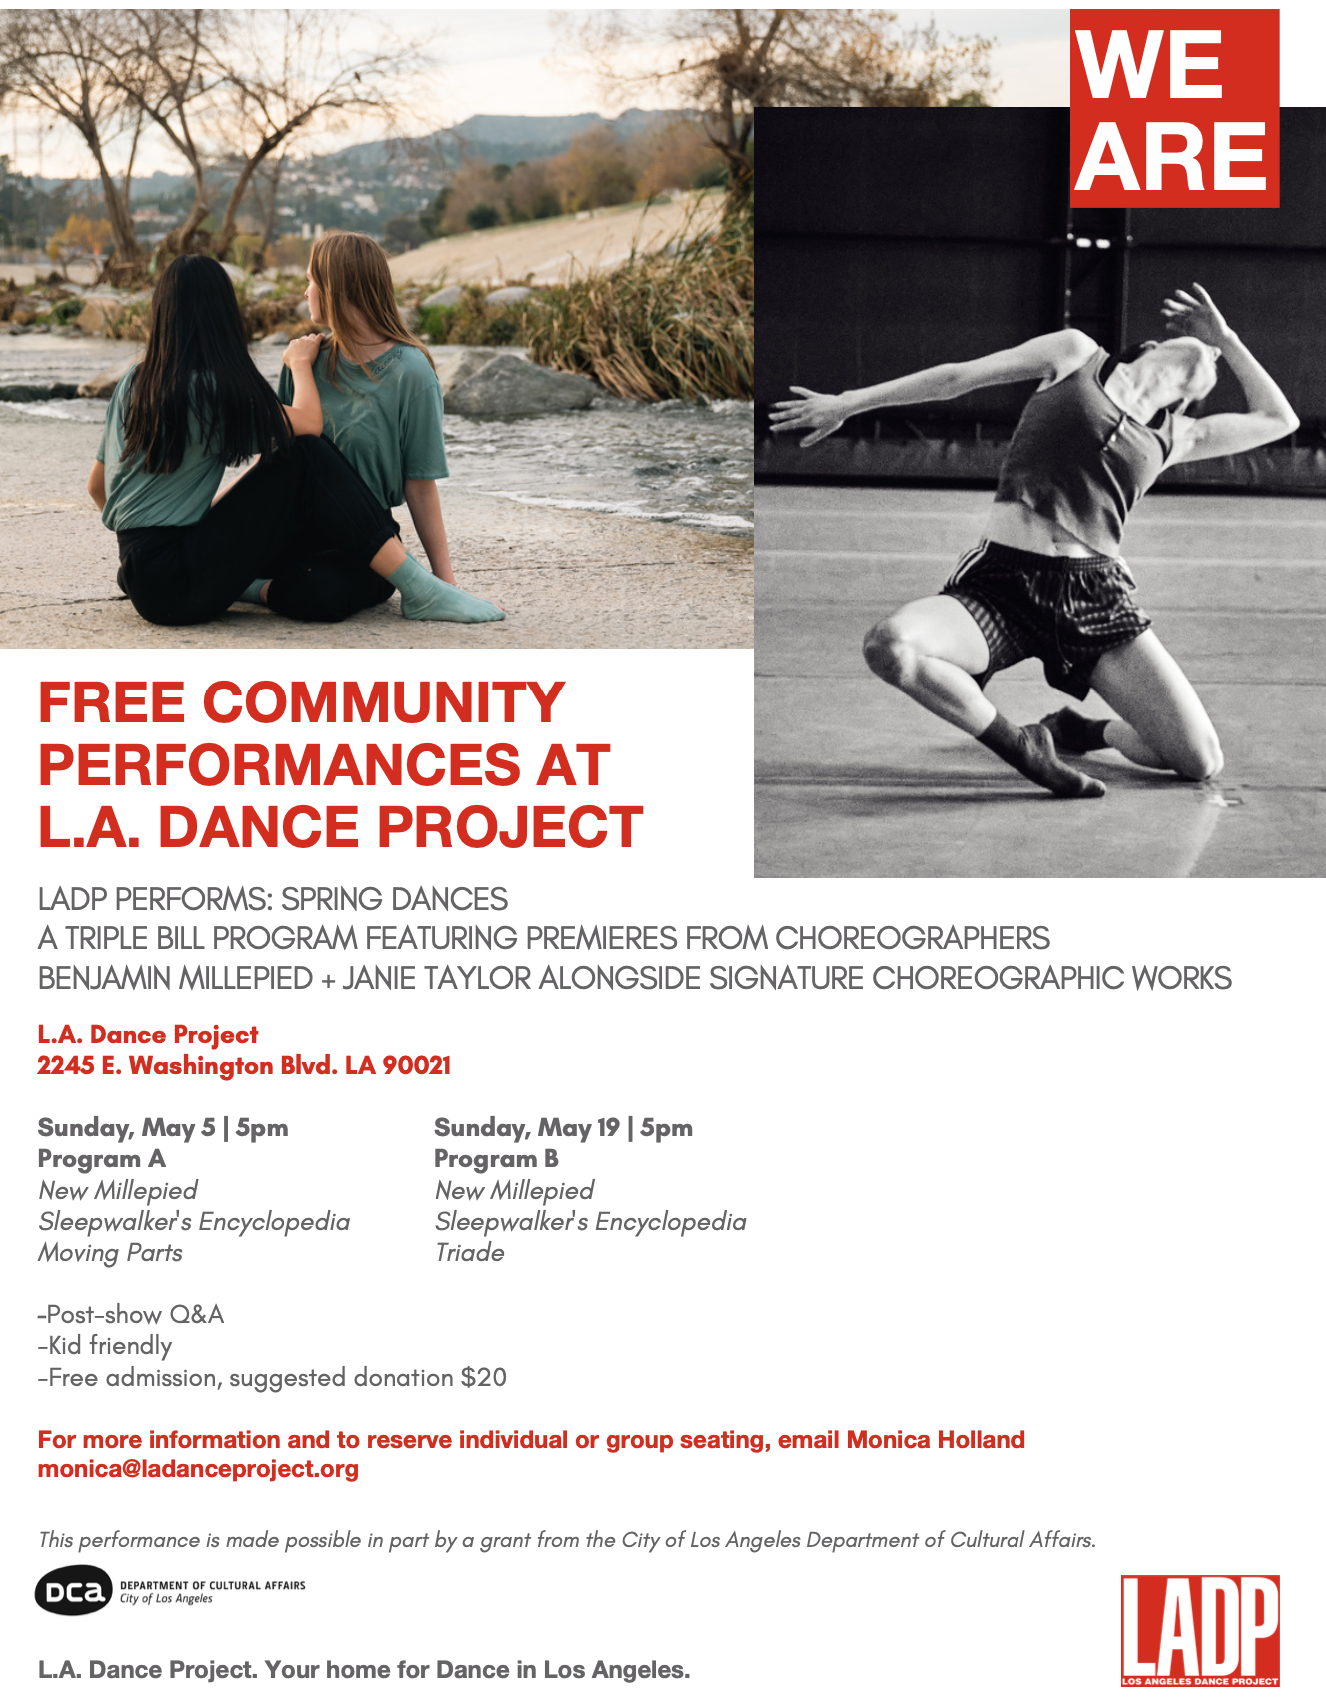 The image is a poster promoting free community performances at the L.A. Dance Project featuring a triple bill program with premieres from choreographers Benjamin Millepied and Janie Taylor. The performances will take place on Sunday, May 5th and Sunday, May 19th at 5 pm. For more information and reservations, contact Monica Holland at monica@ladanceproject.org.